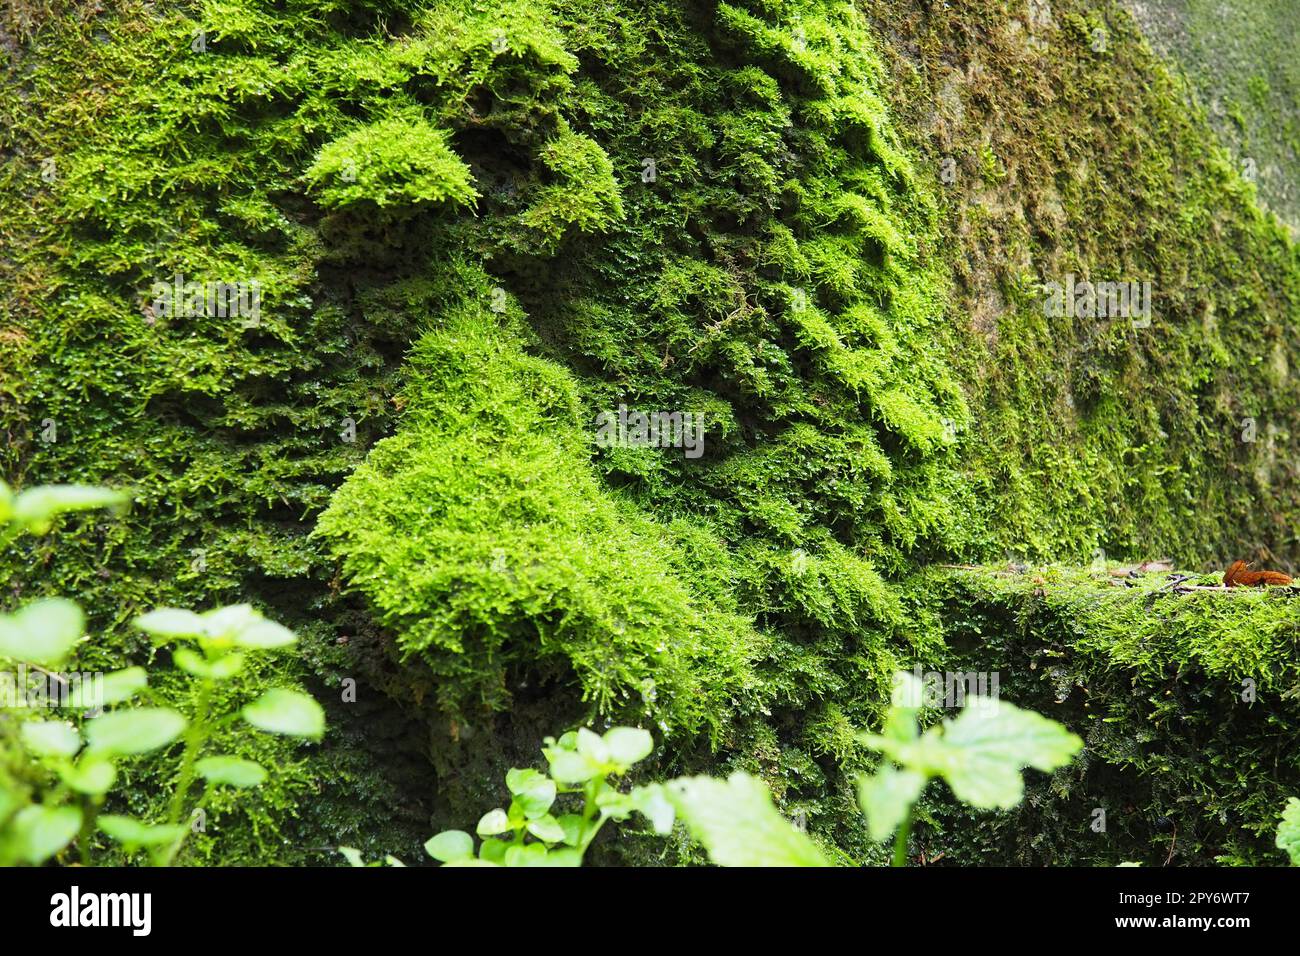 Banja Koviljaca, Loznica, Serbia. Ruins of a building. Rock or concrete damp wall covered with bright green moss. Bryophytes, or Mosses, Real mosses, Bryophyta, department of higher plants Stock Photo